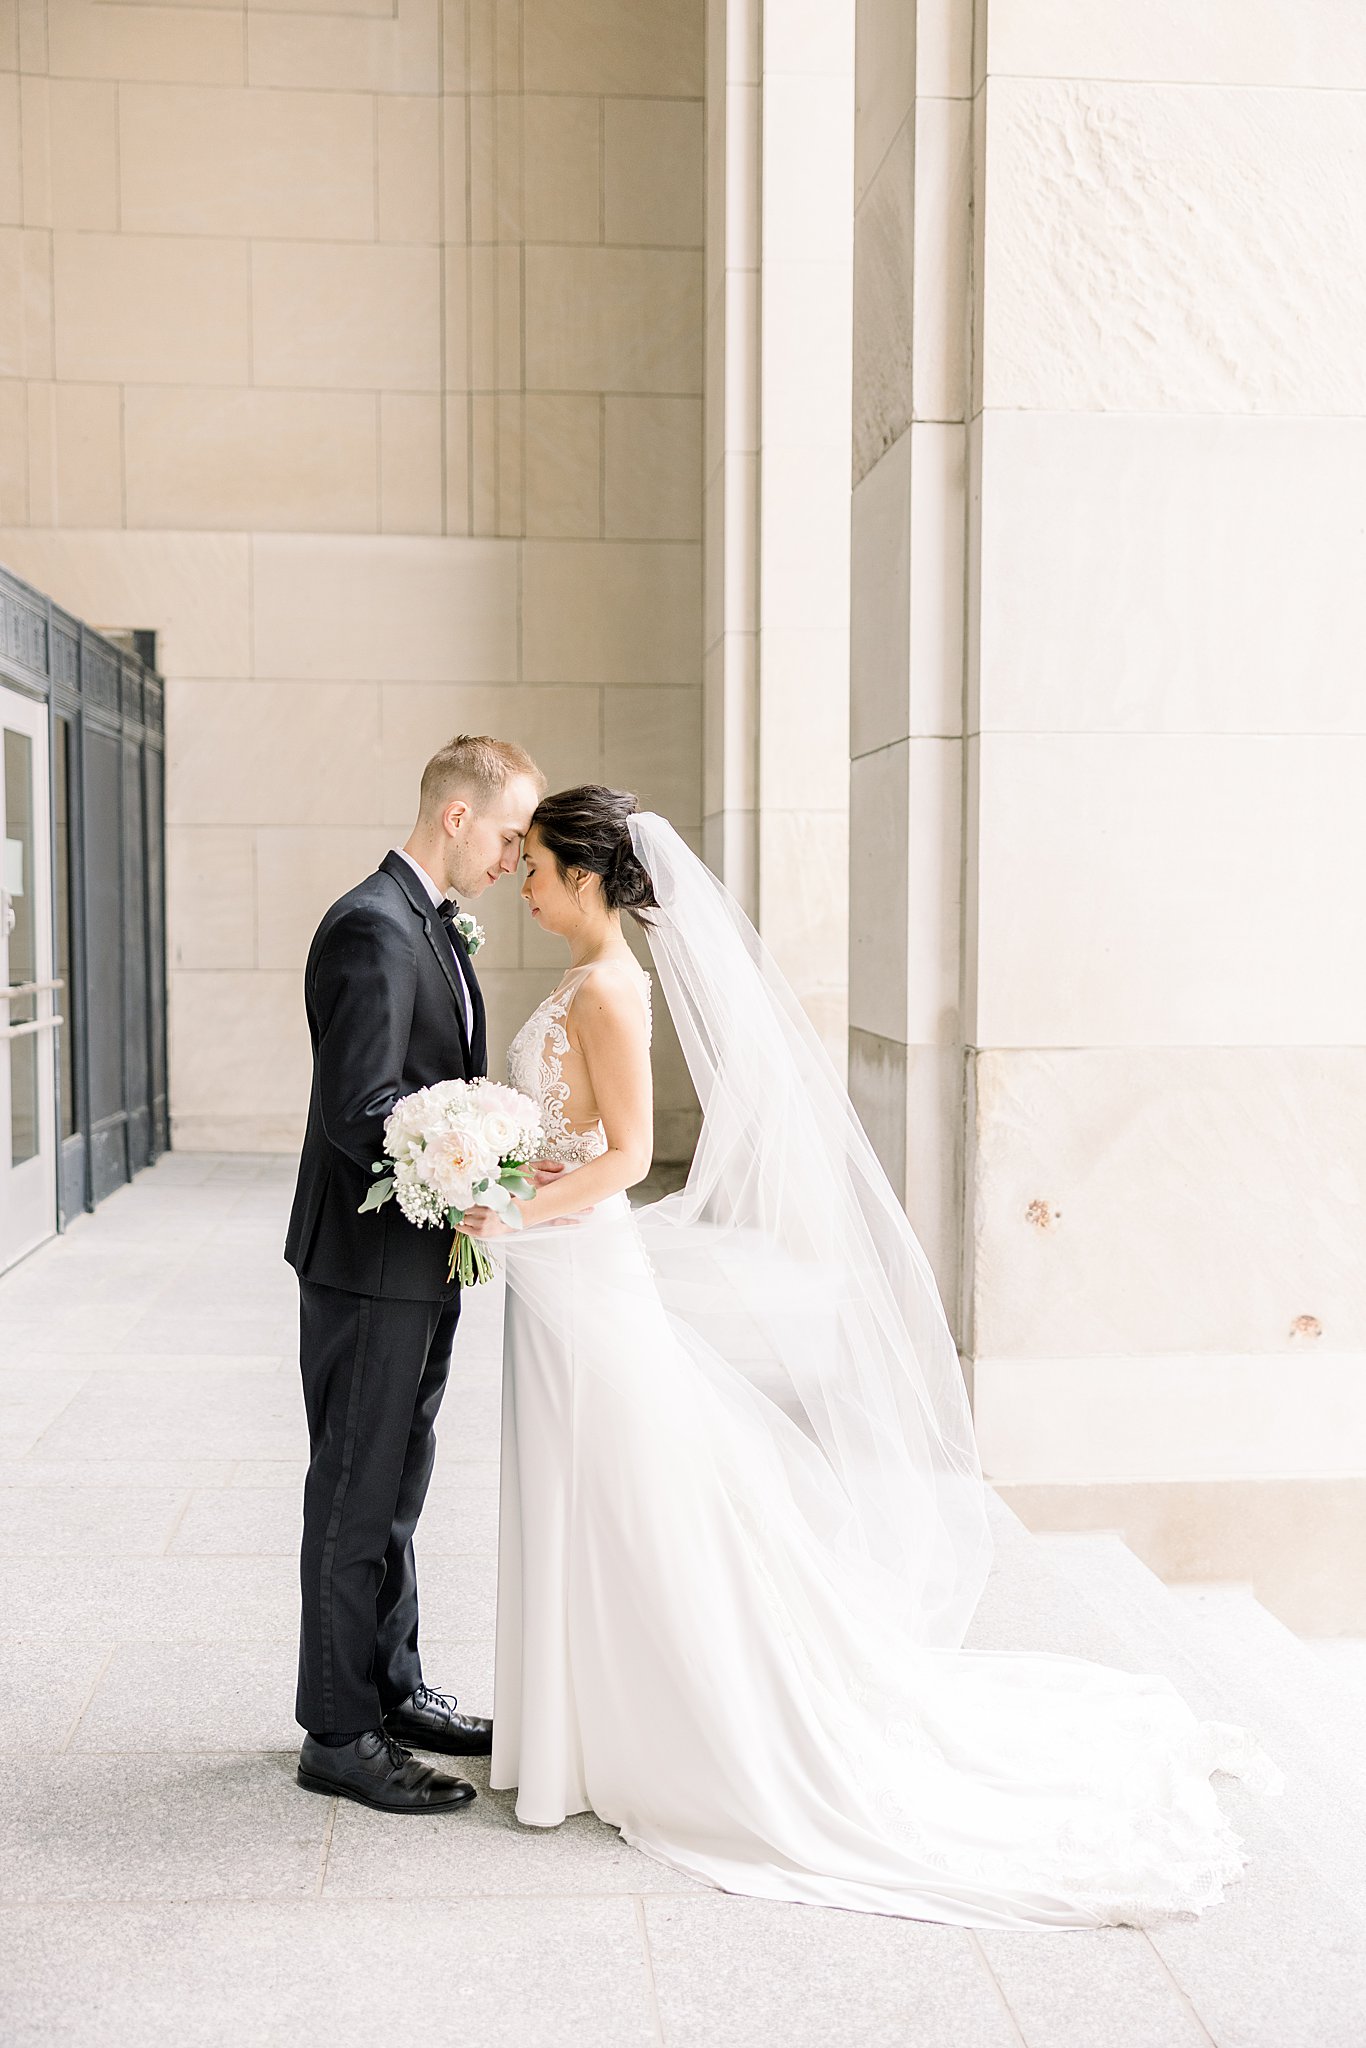 Bride and groom portraits downtown Grand Rapids during elegant Grand Rapids wedding.